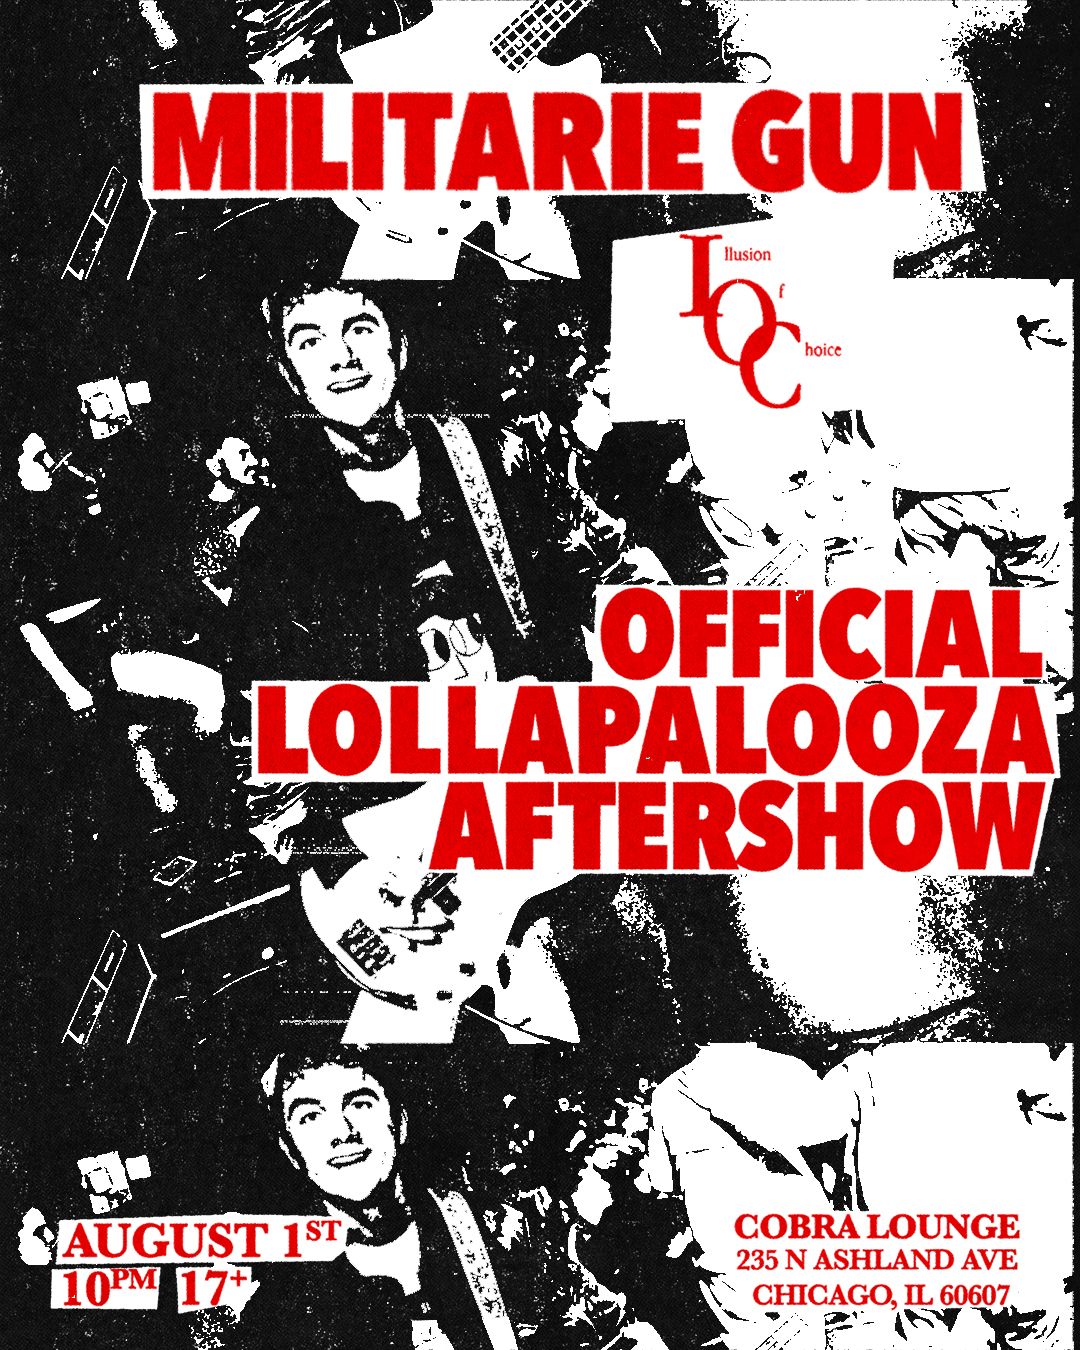 Militarie Gun \/ Illusion Of Choice Official Lollapalooza Aftershow @ Cobra Lounge